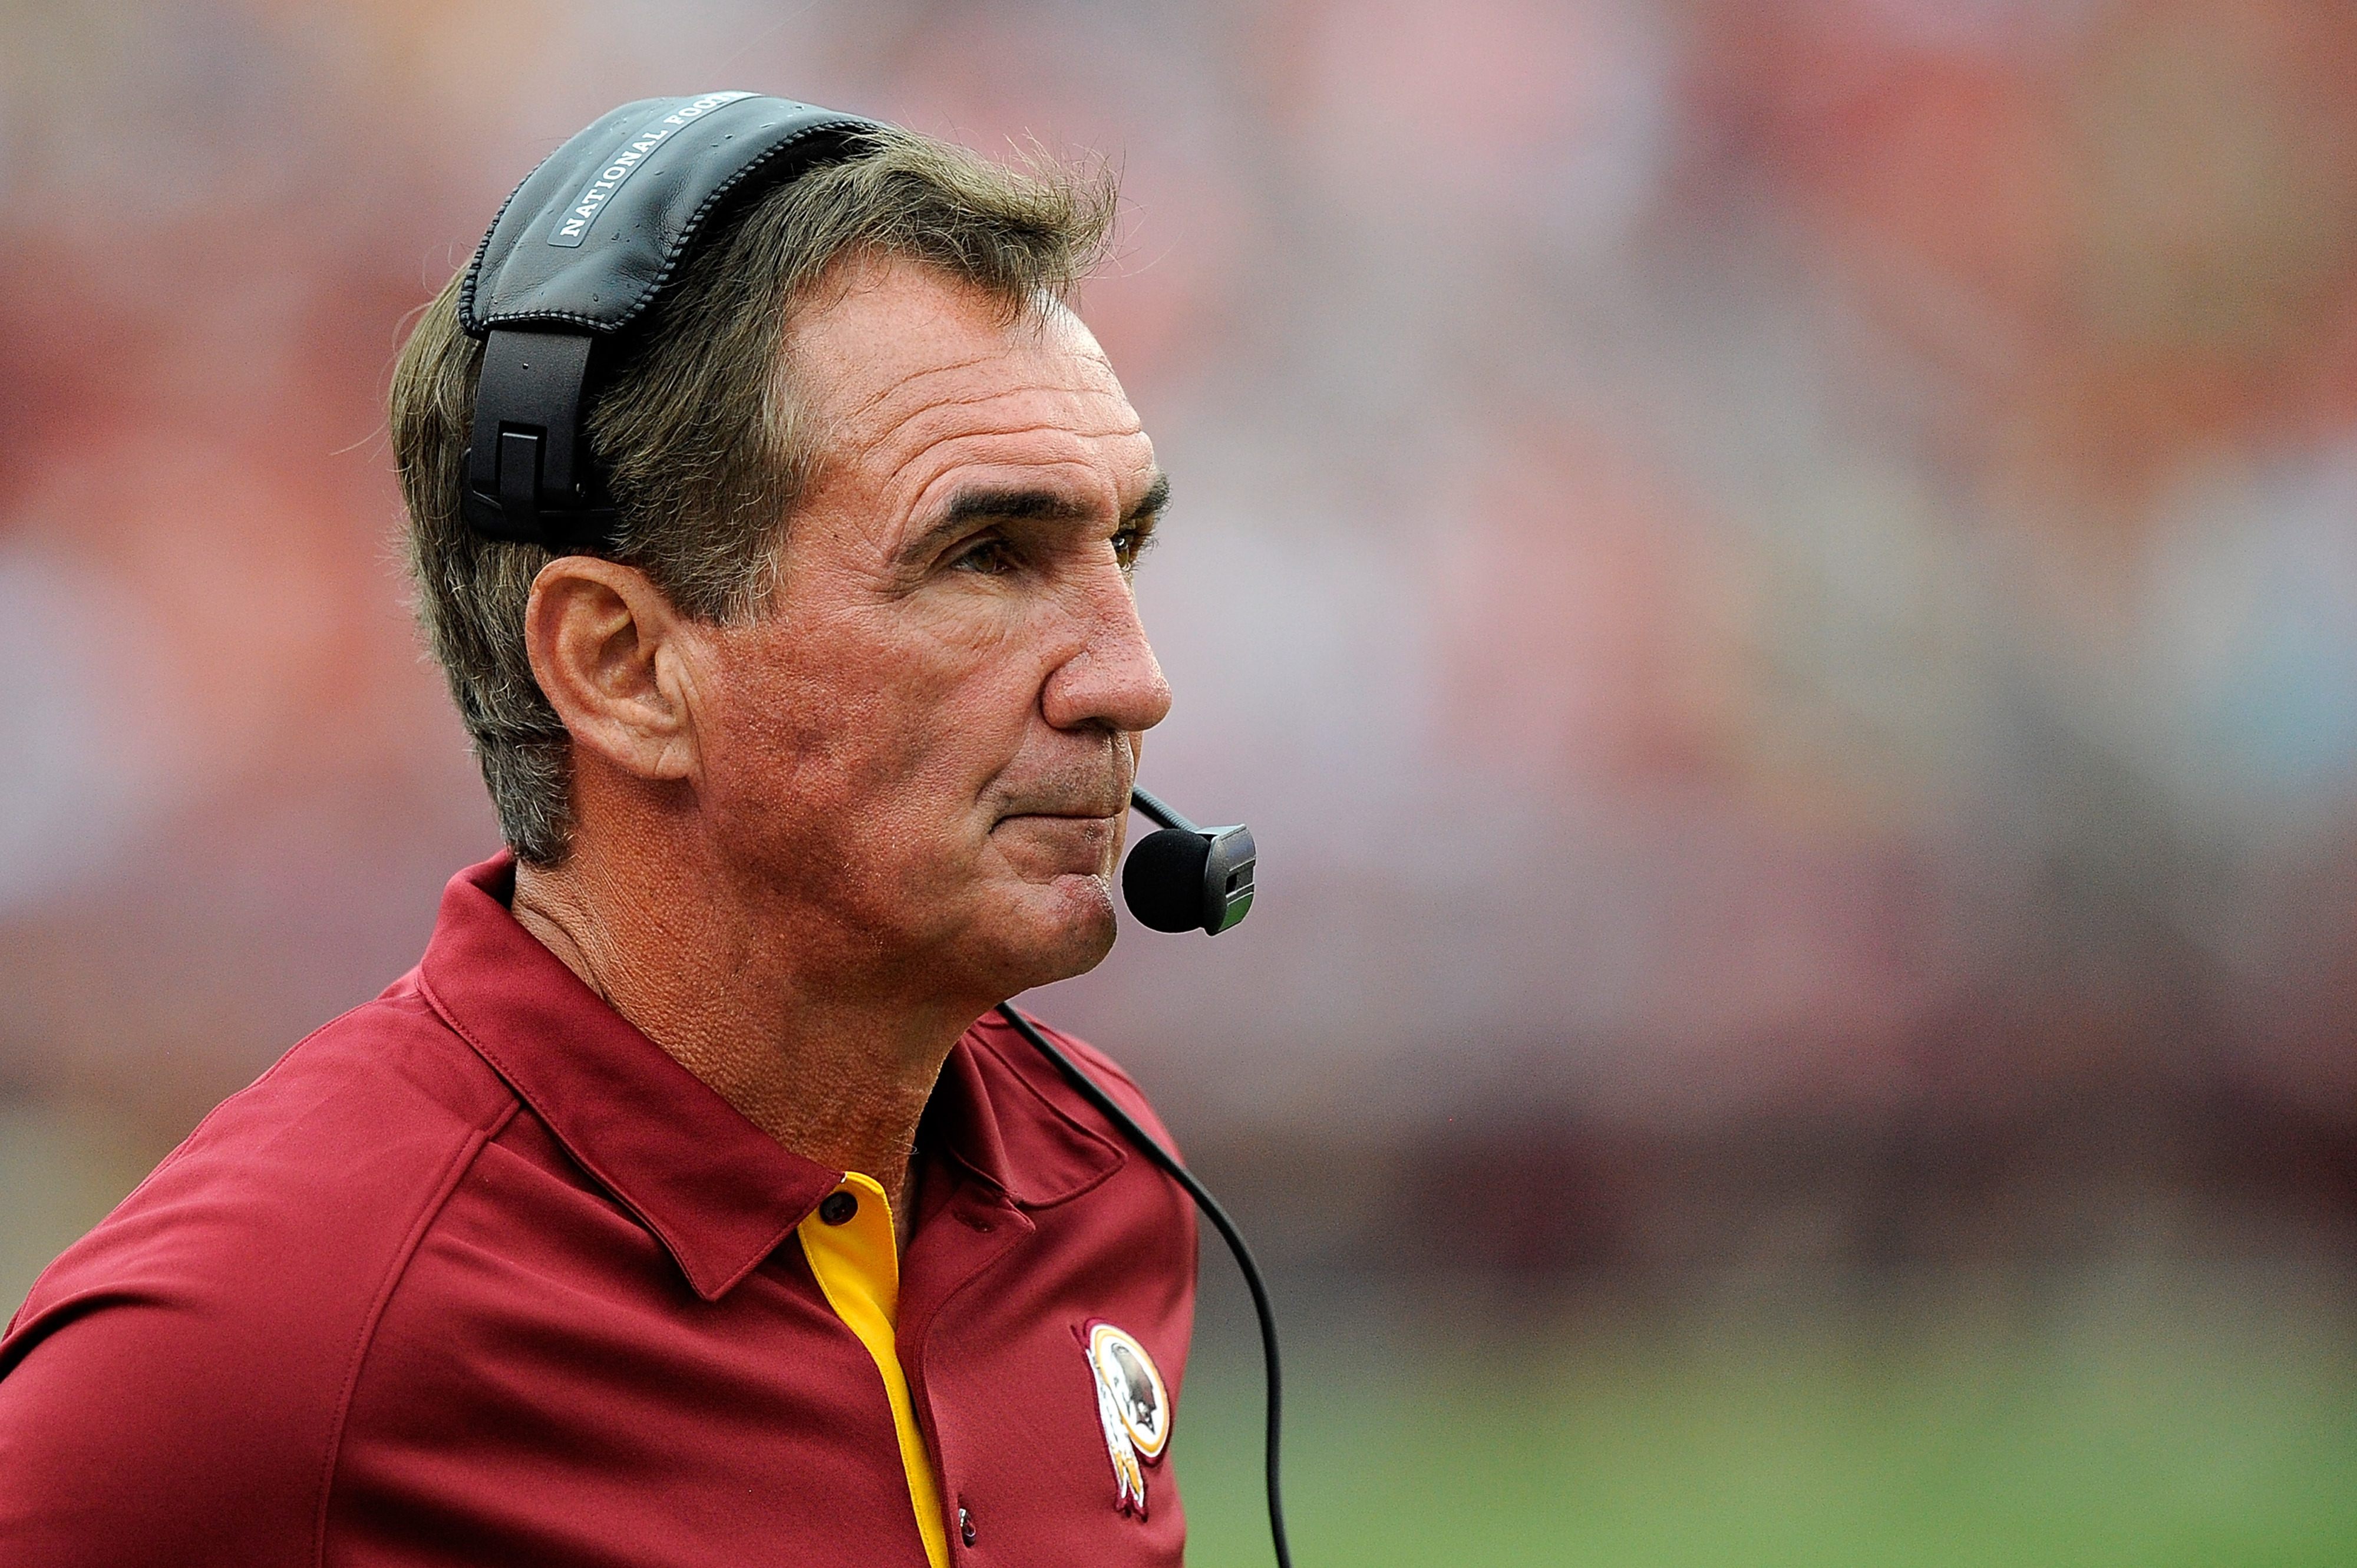 LANDOVER, MD - AUGUST 25:  Washington Redskins head coach Mike Shanahan watches play during a preseason game against the Indianapolis Colts of the at FedExField on August 25, 2012 in Landover, Maryland.  (Photo by Patrick McDermott/Getty Images)